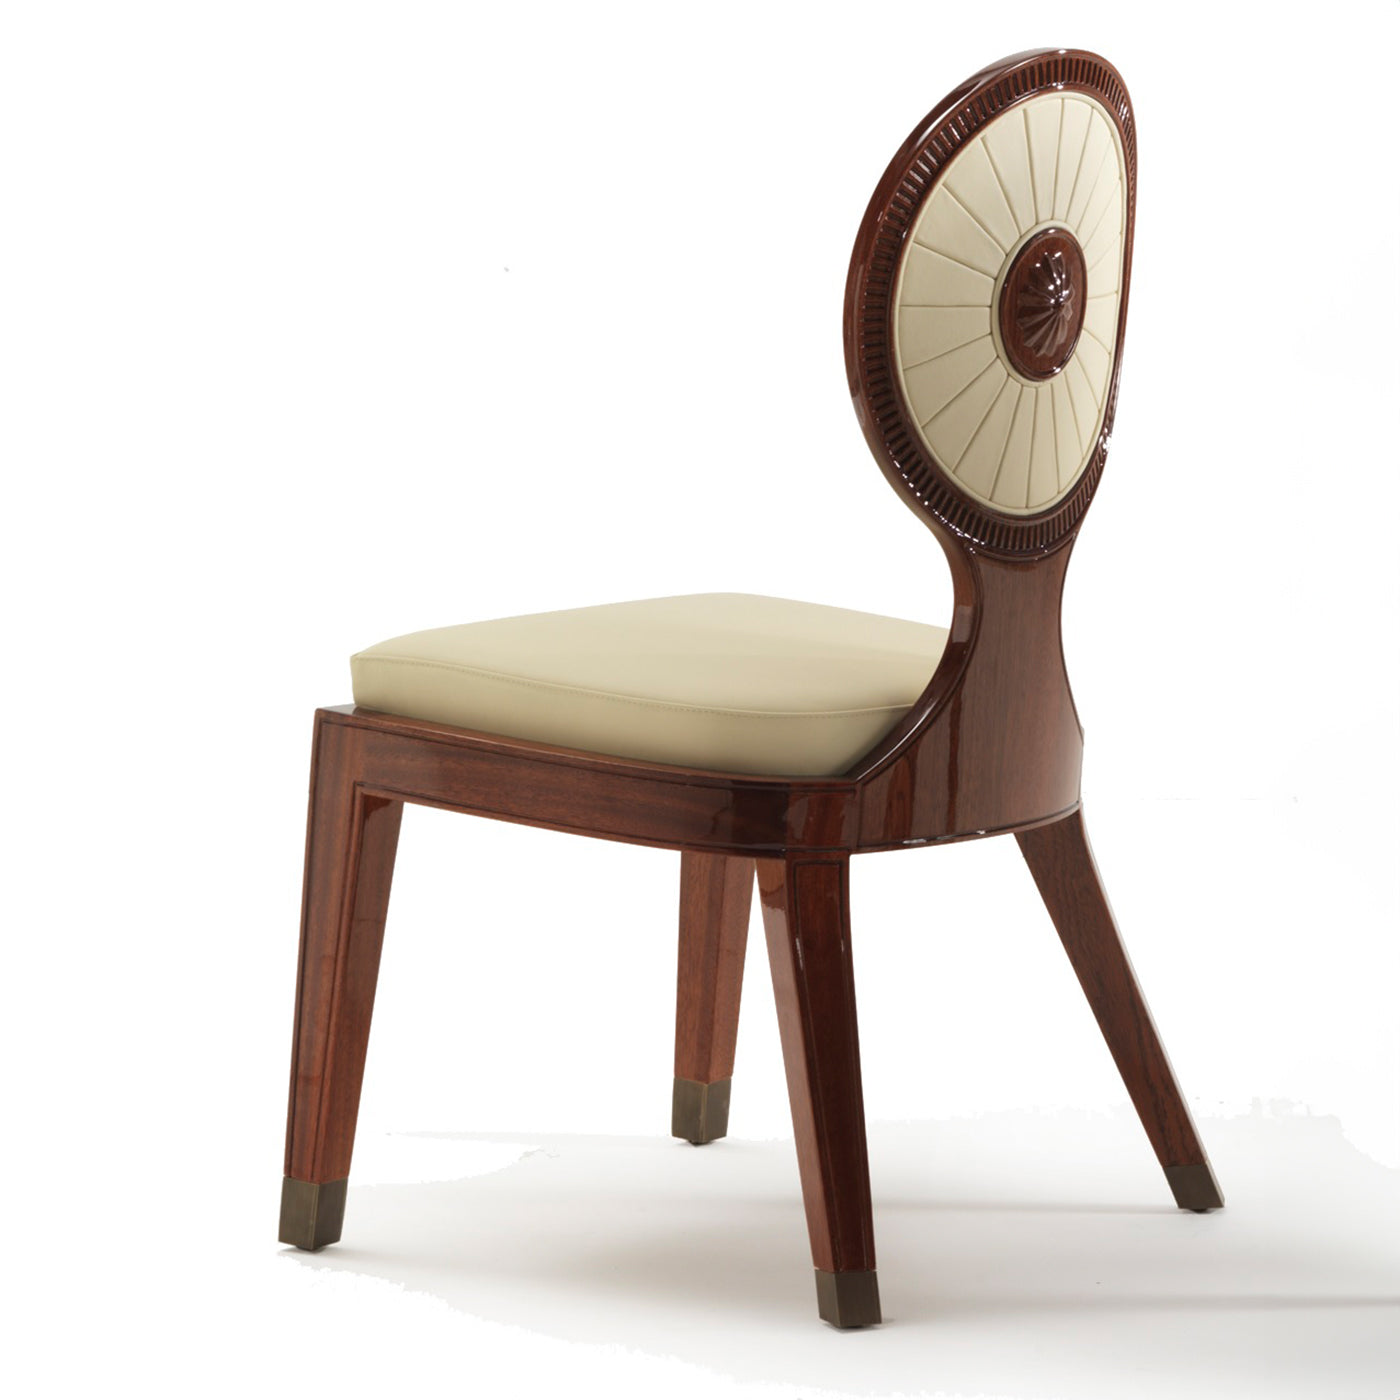 Red Sun Dining Chair by Archer Humphryes Architects - Alternative view 3